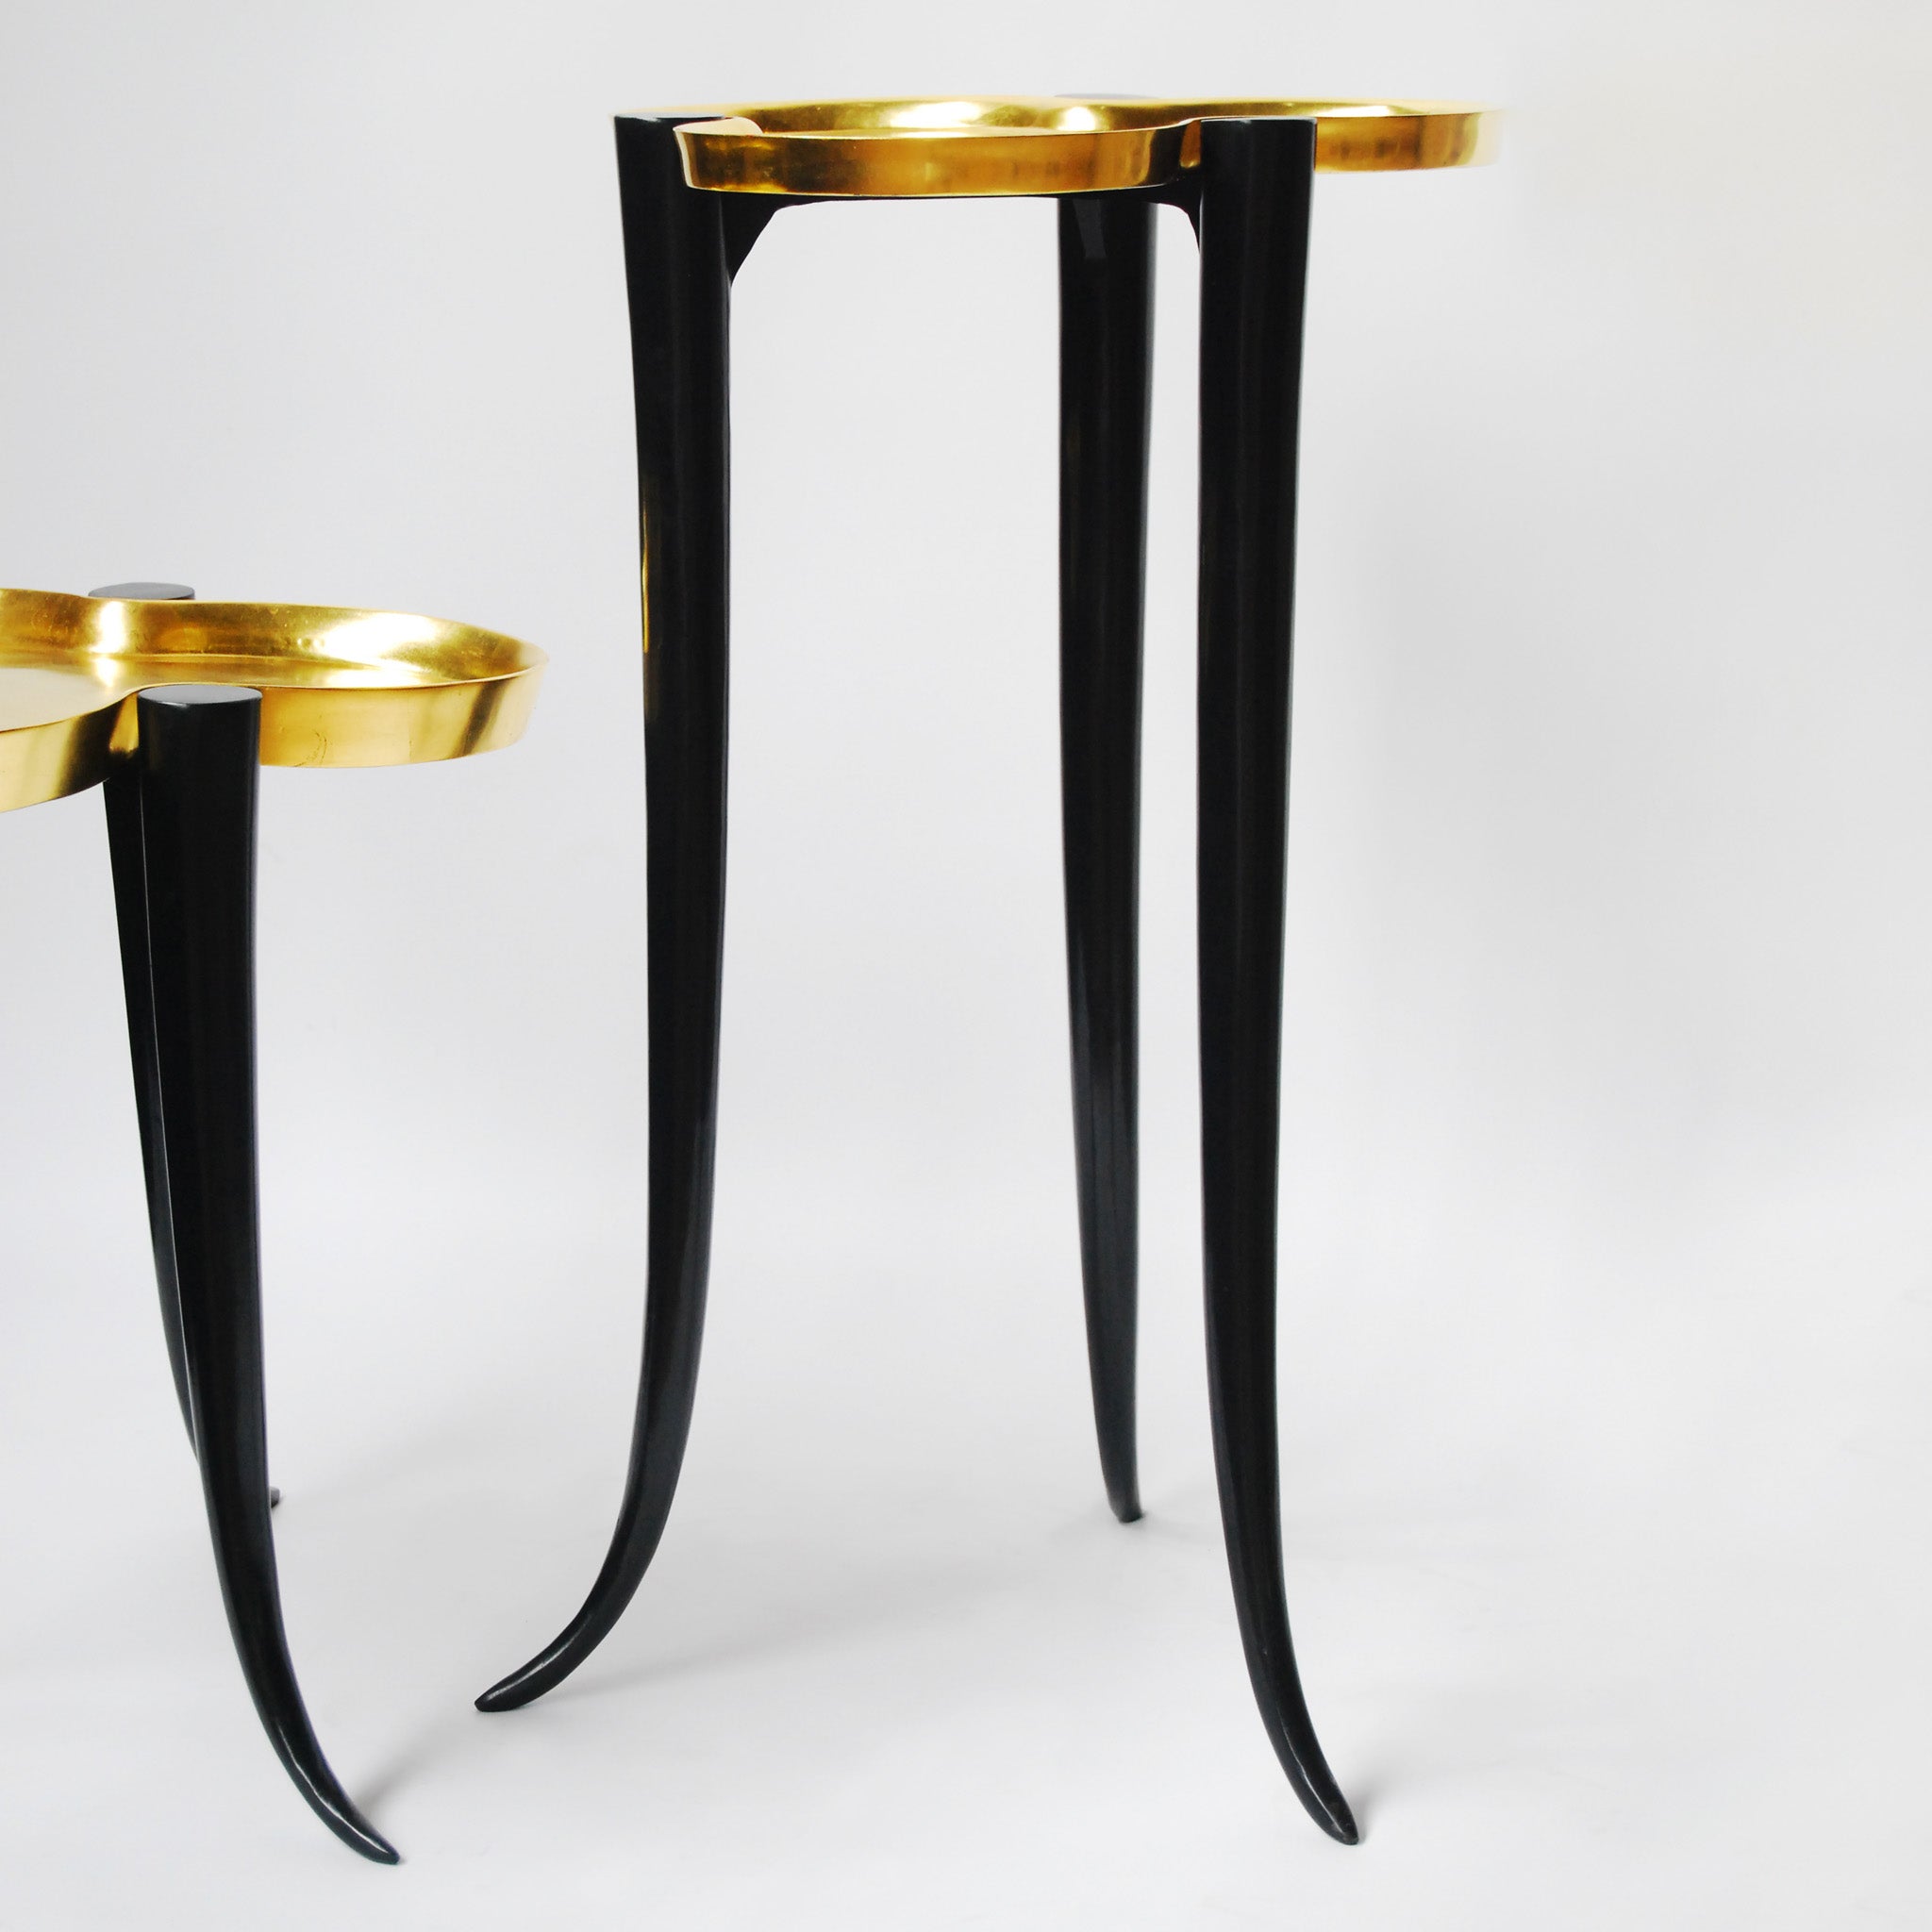 Chime Side Table